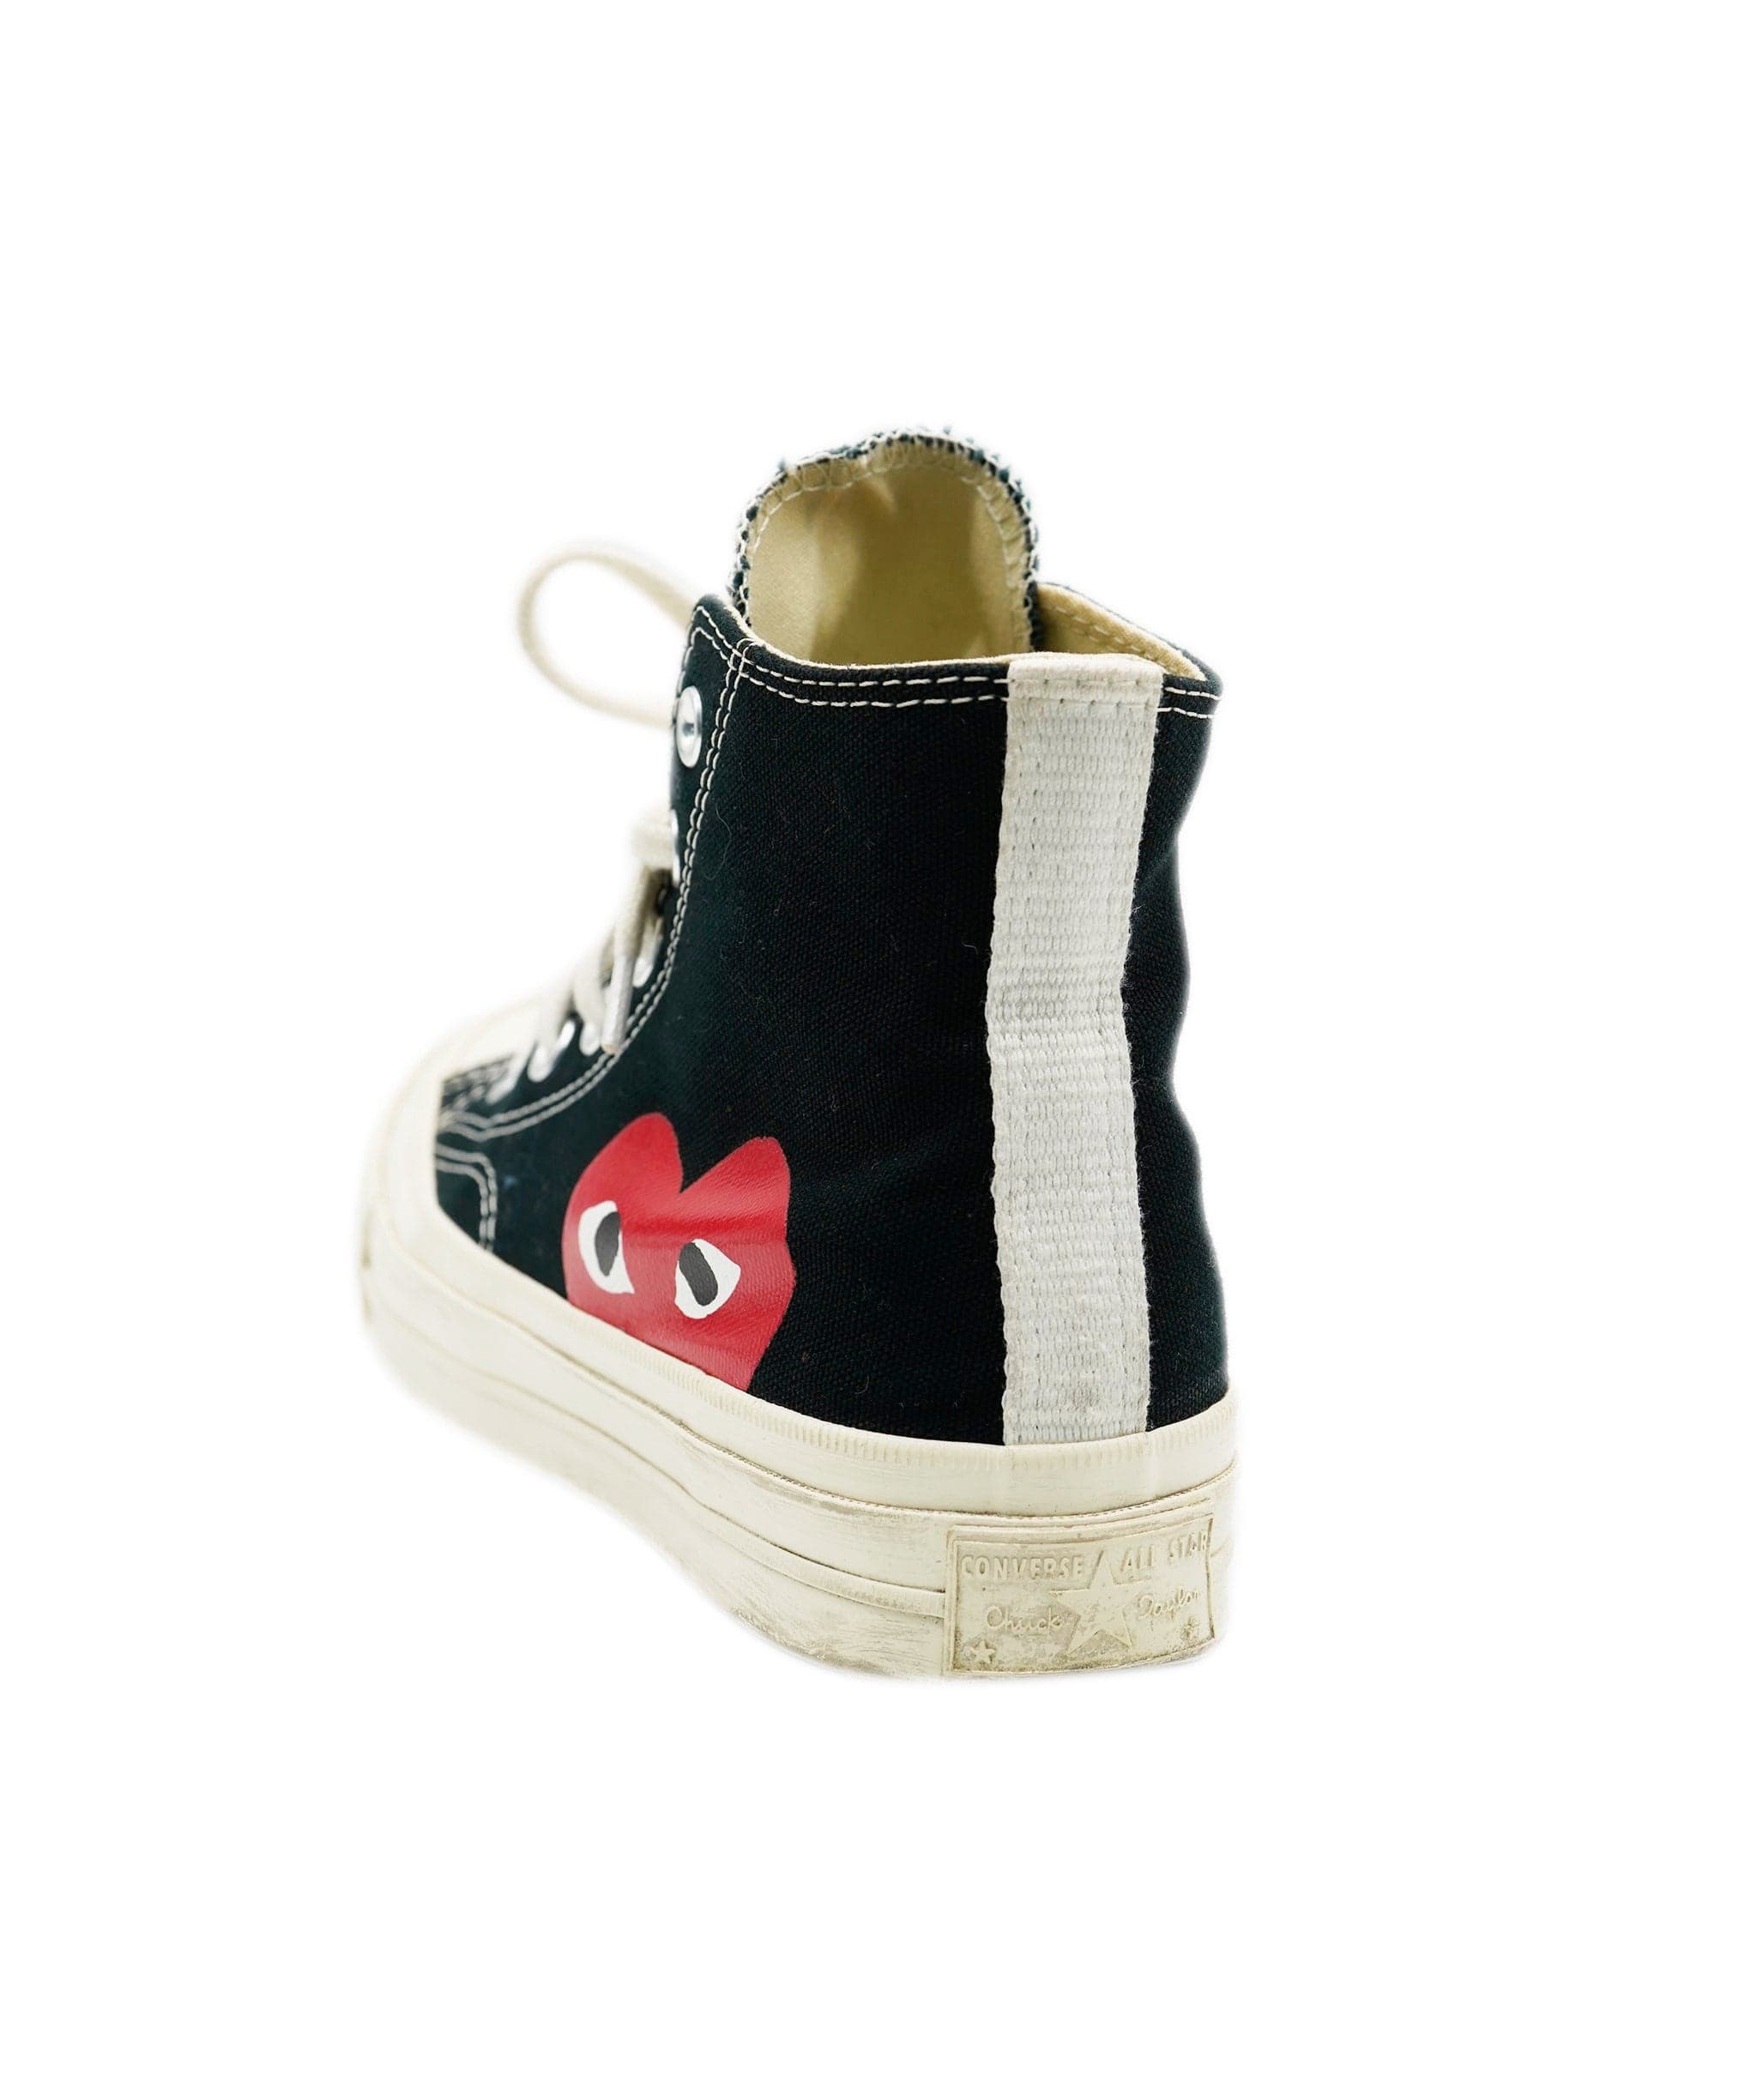 Converse x CDG Converse x CDG Black High Top Trainers size 4 - ALC0903